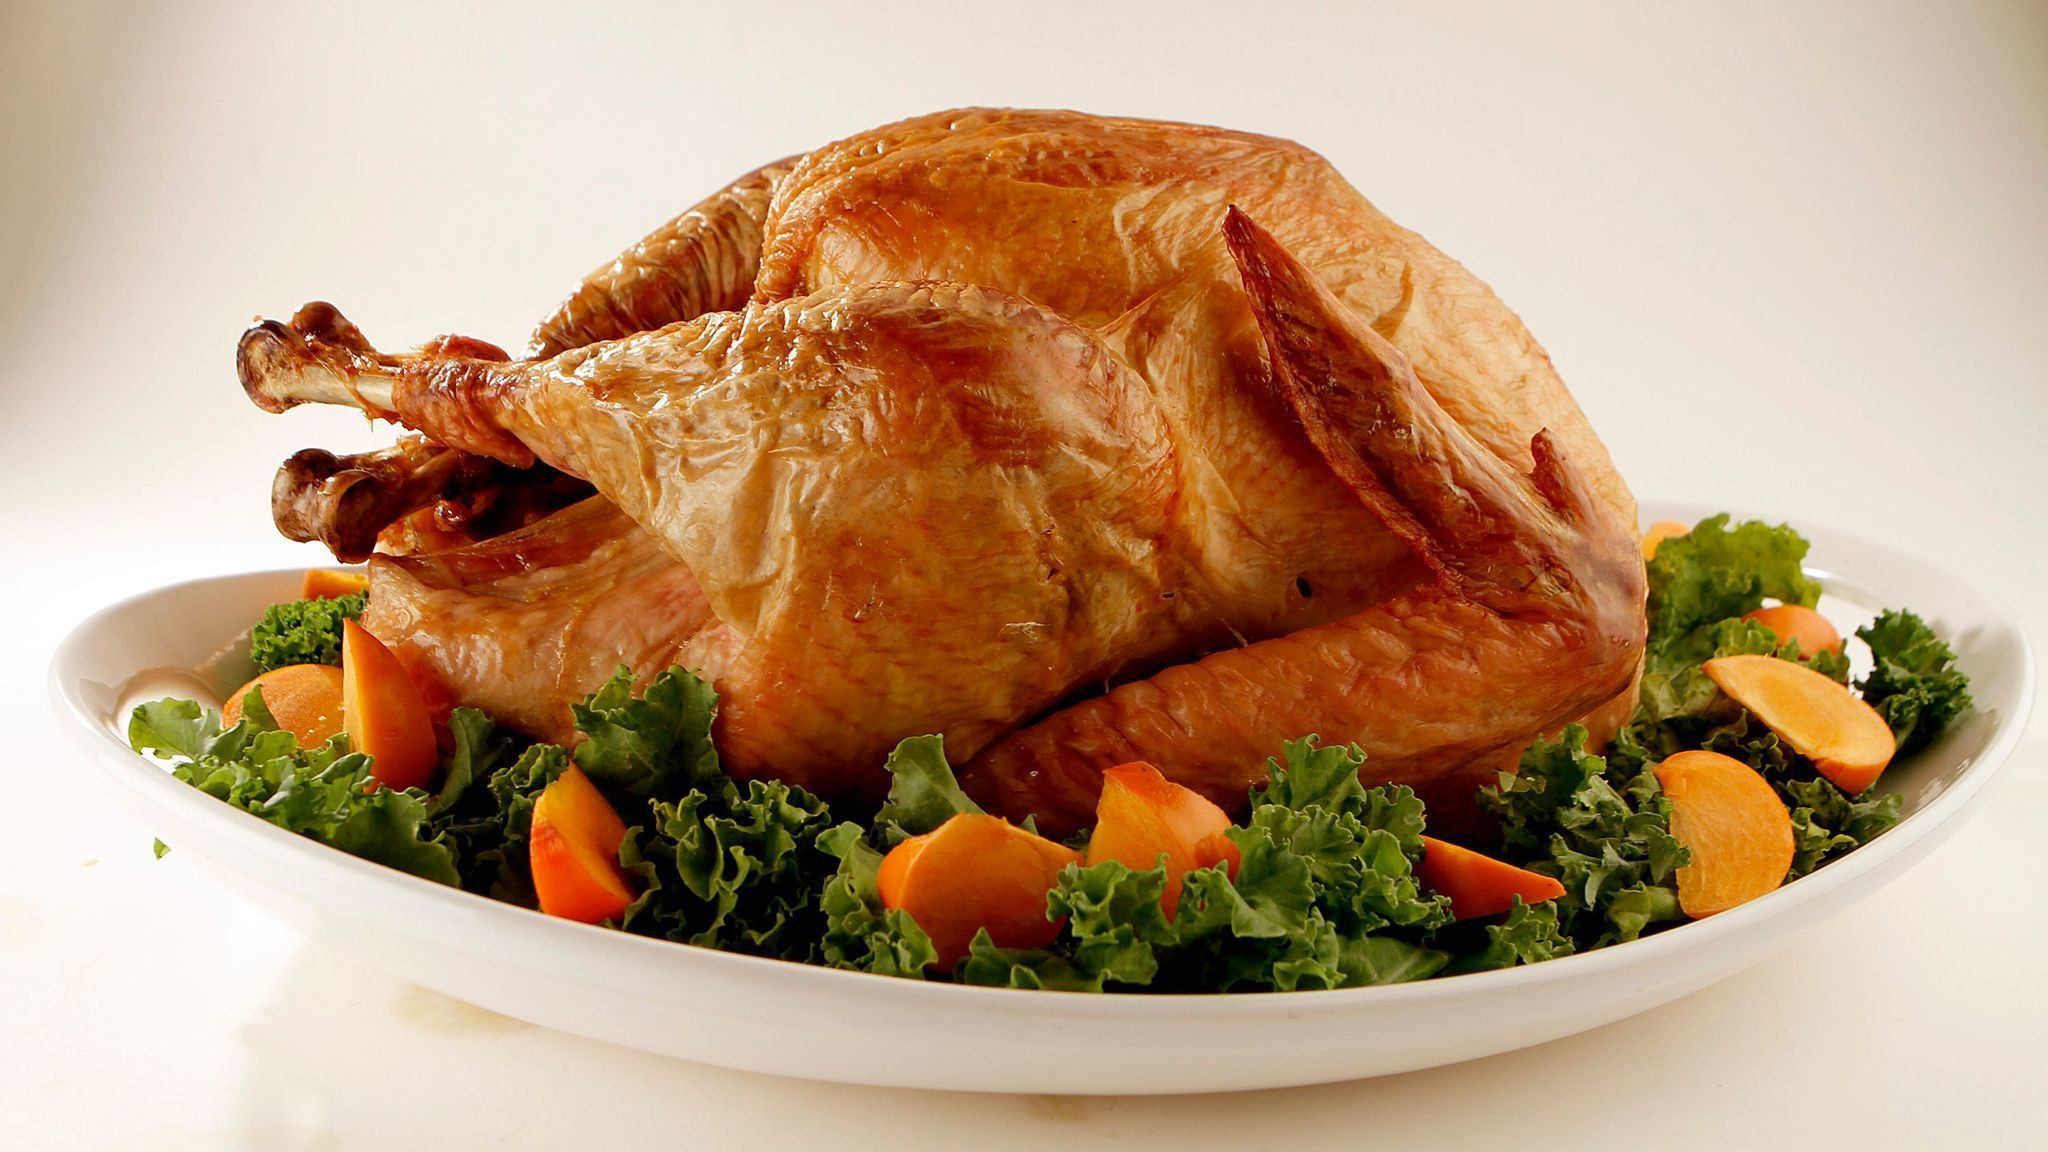 Images Of Thanksgiving Turkey
 A beginner s guide to cooking a Thanksgiving turkey LA Times